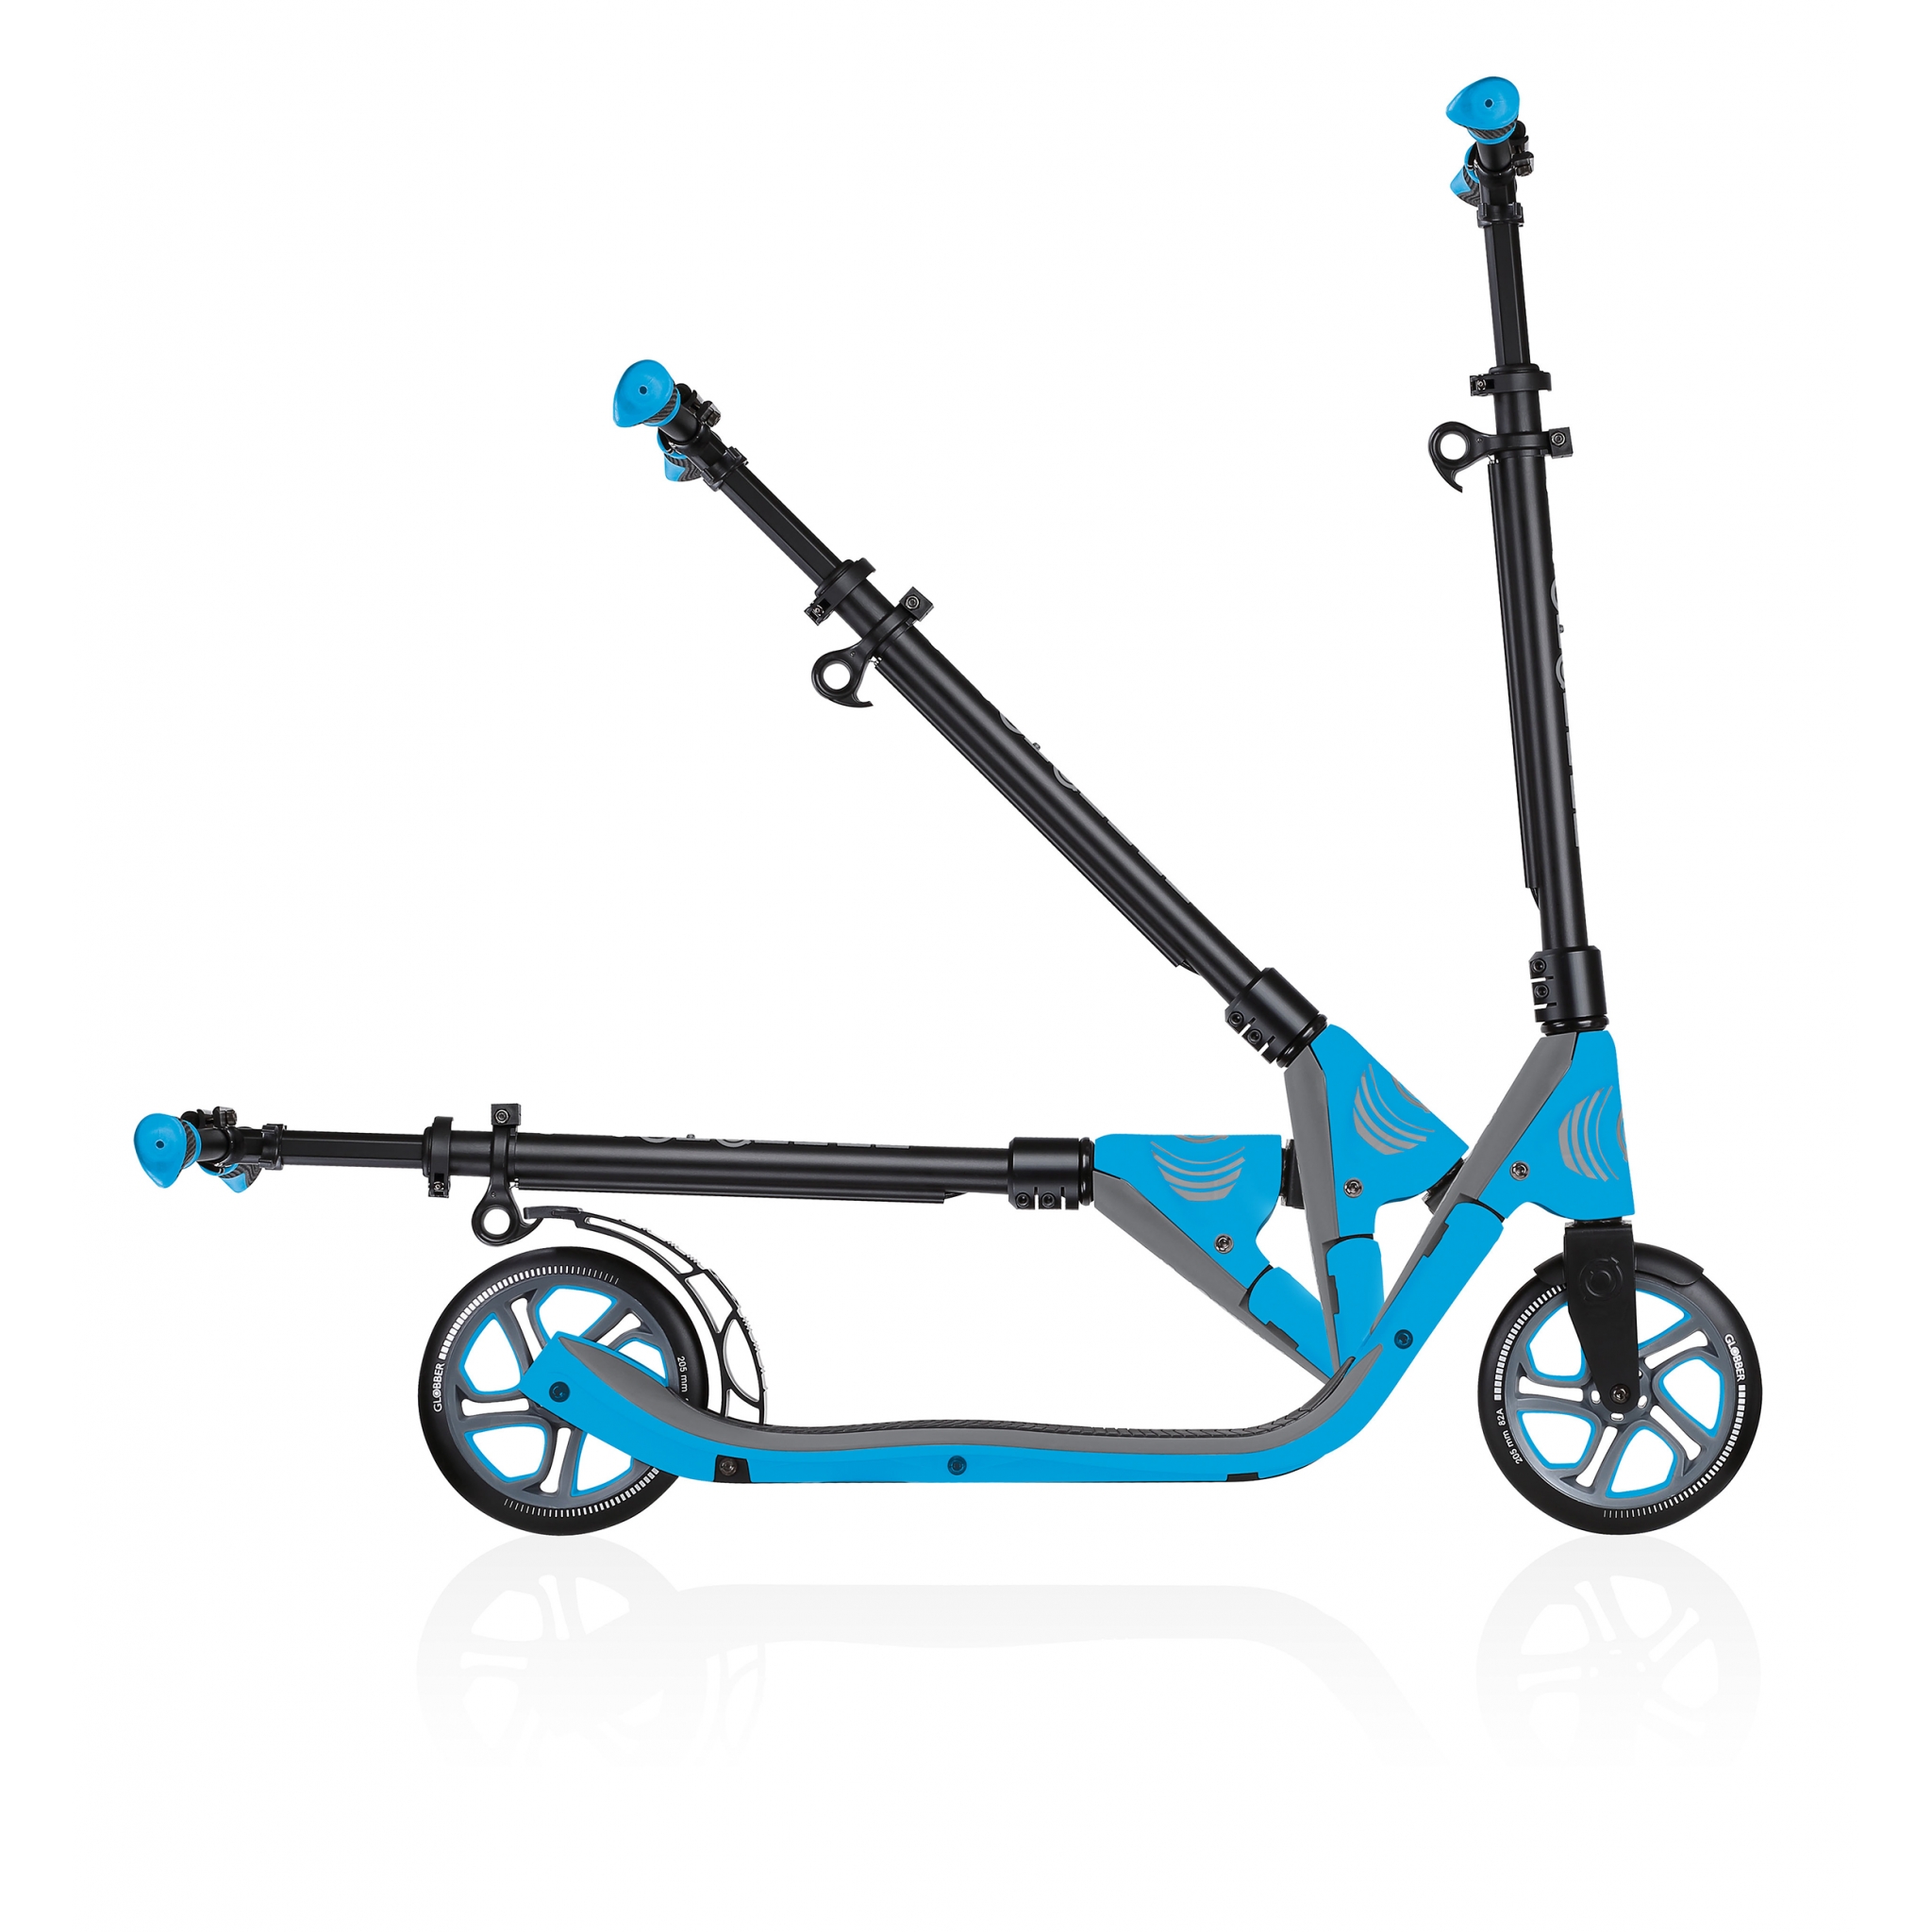 2-wheel foldable scooter for adults - Globber ONE NL 205 3